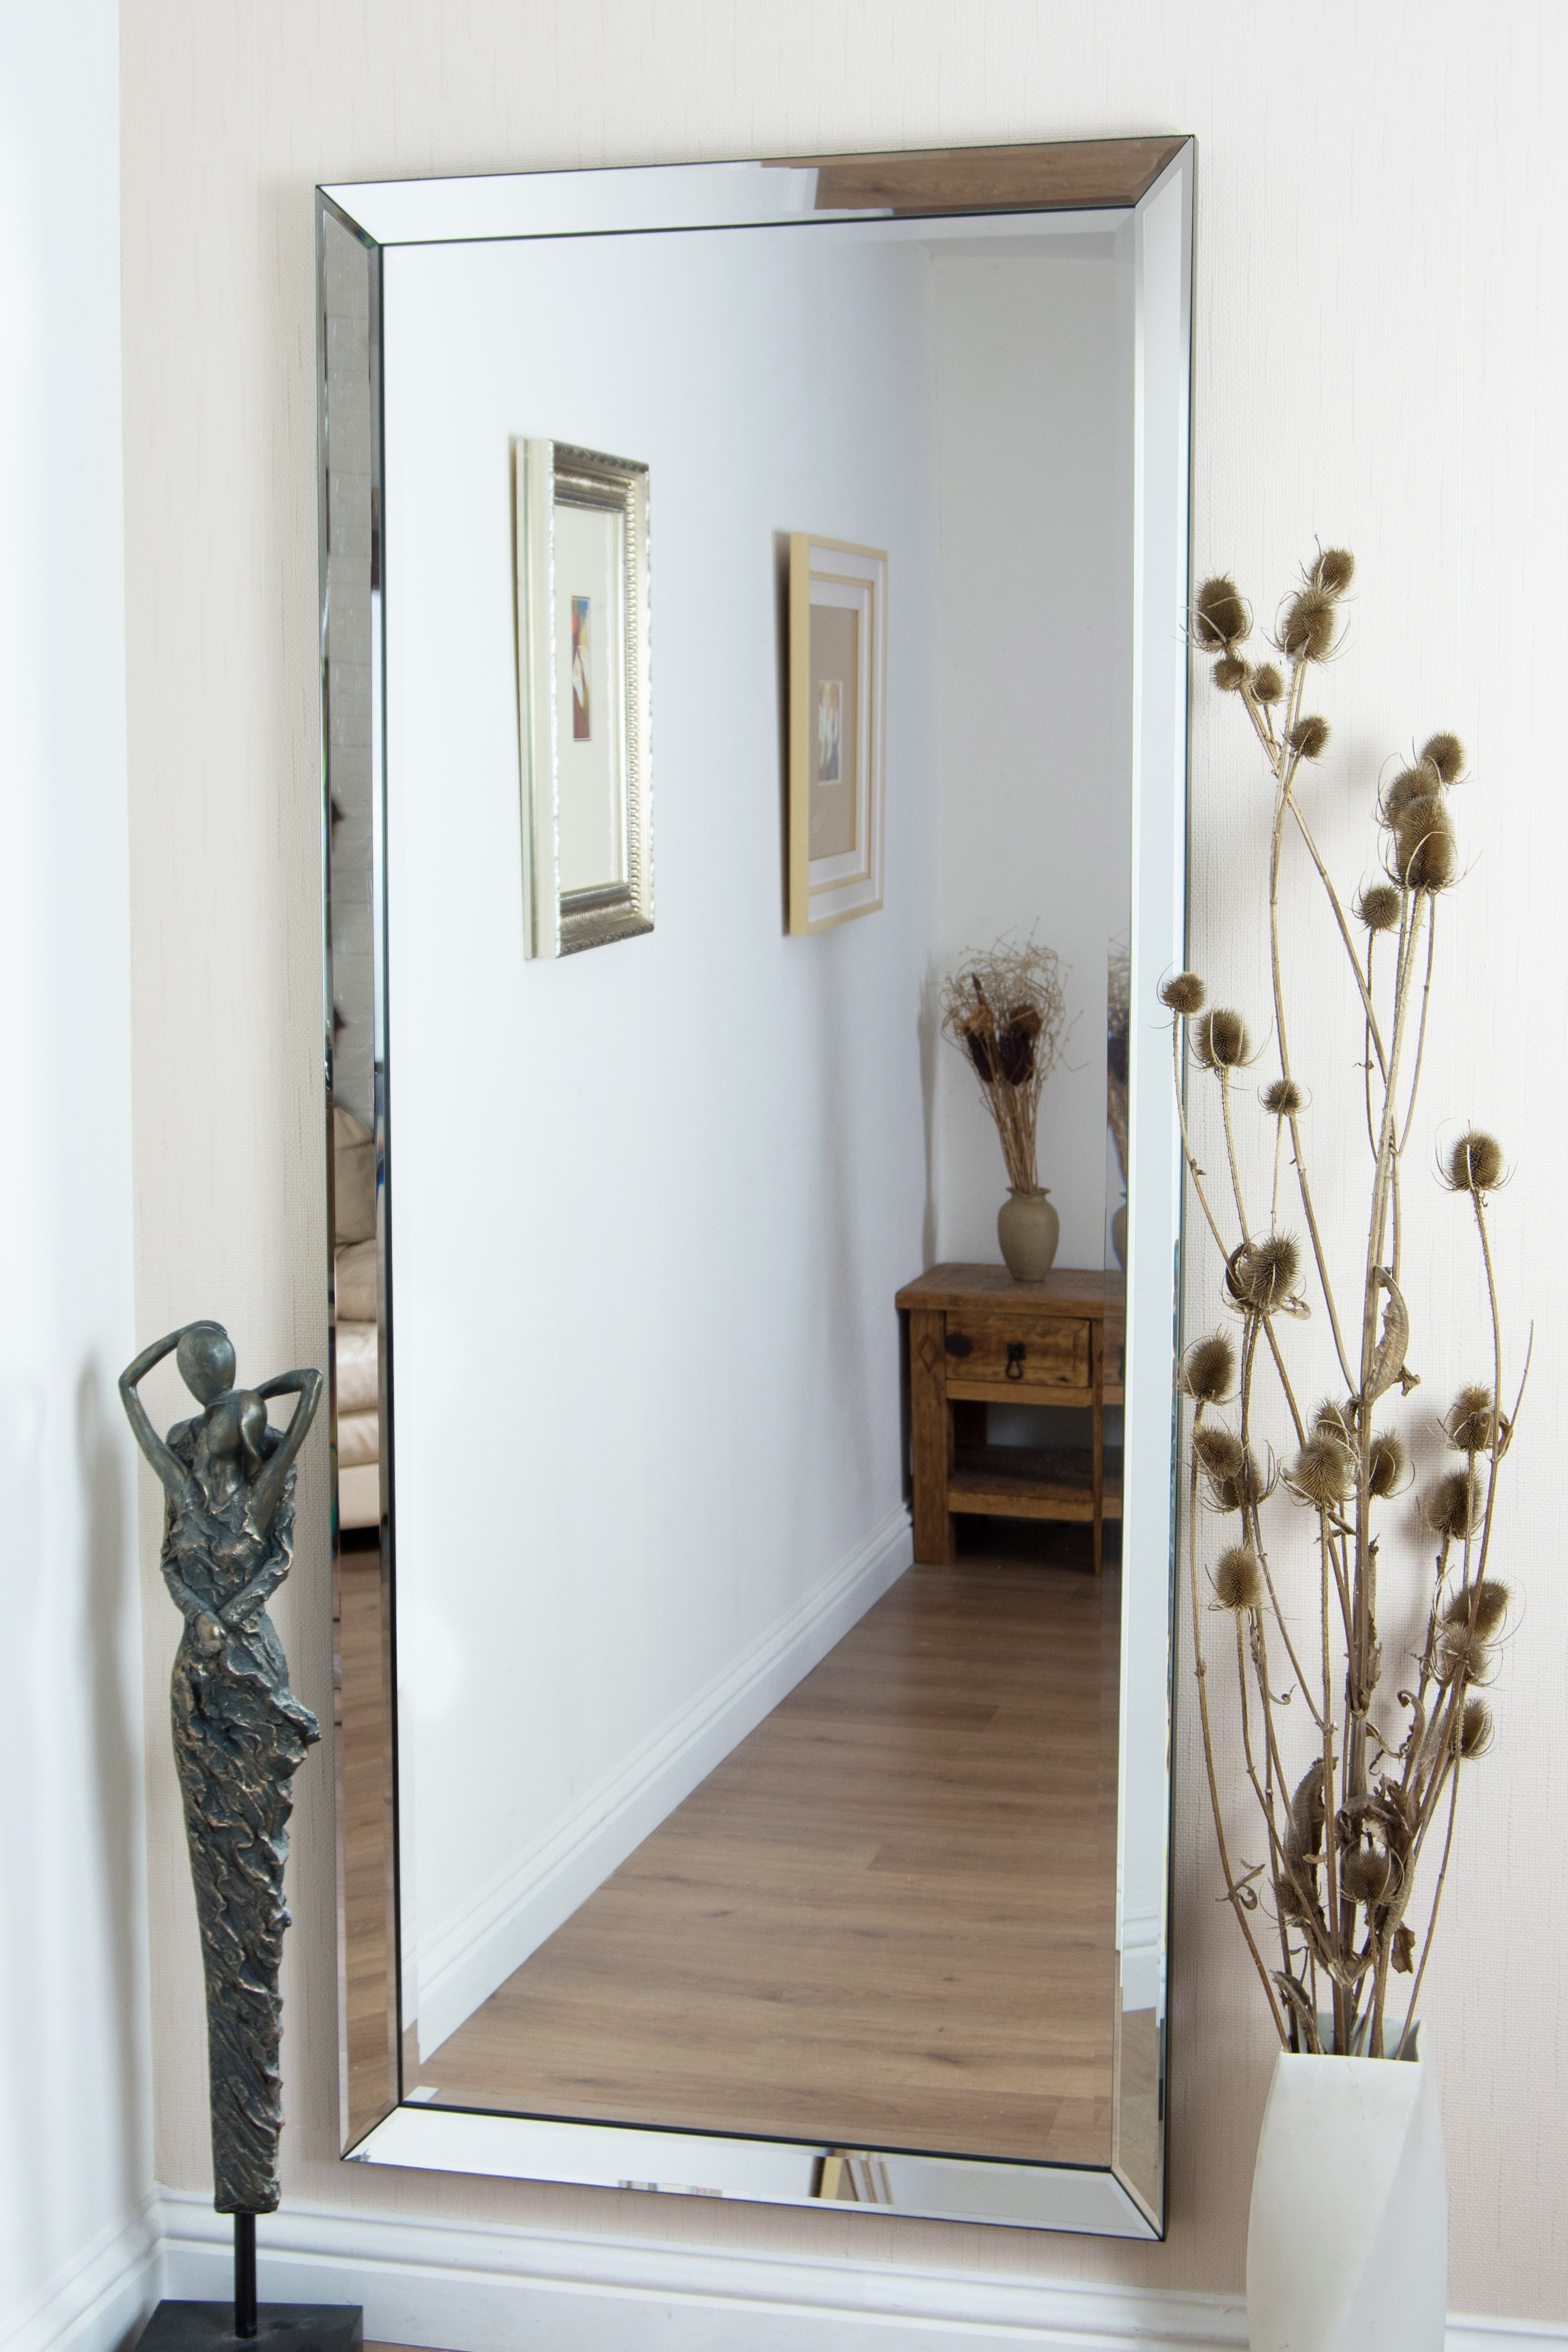 Extra Large Wall Mirror: Add A Touch Of Elegance To Your Home